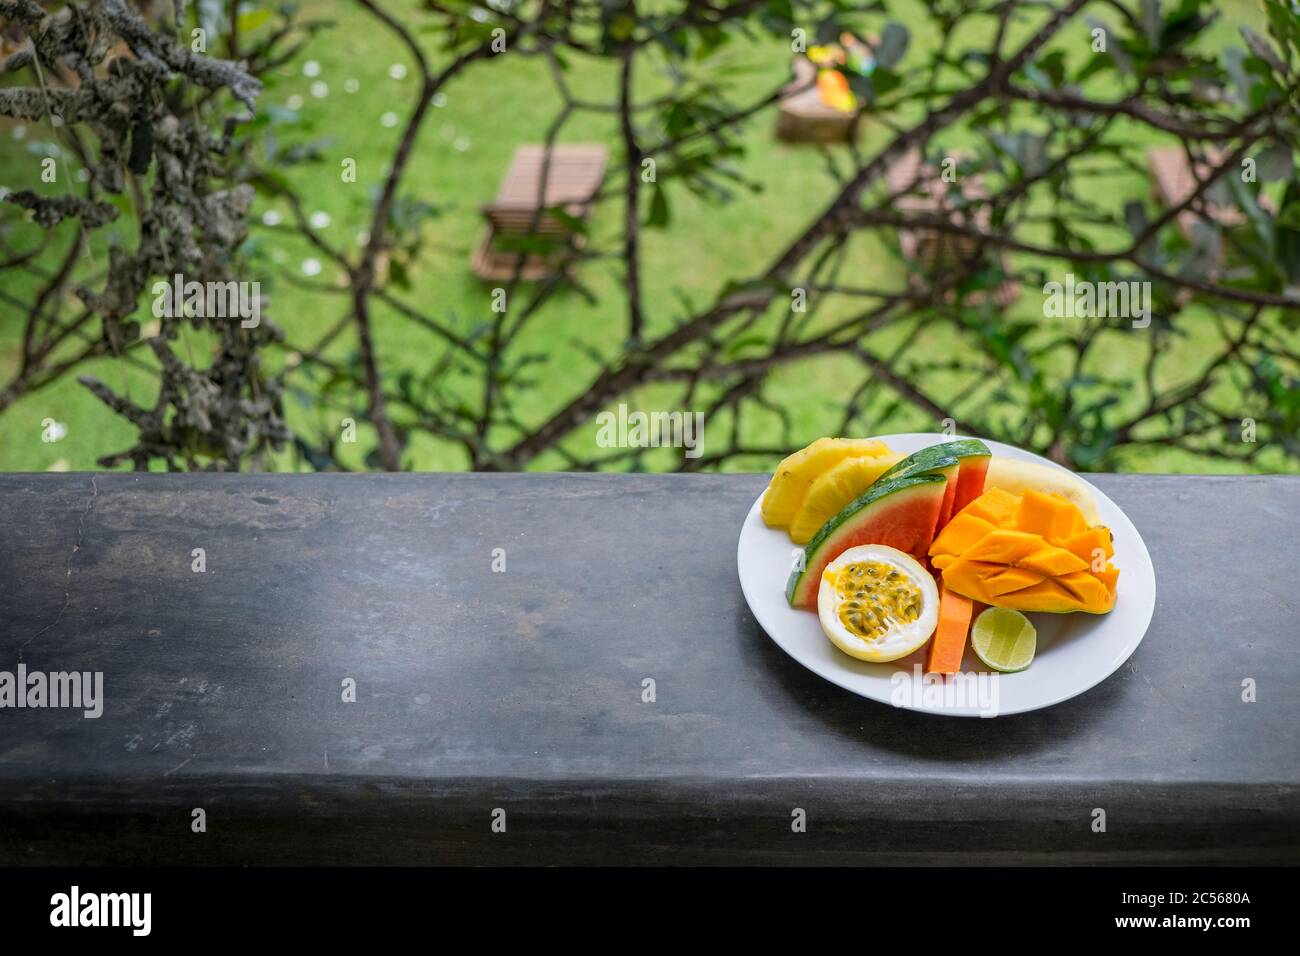 colorful fruit plate on the balcony overlooking the garden Stock Photo